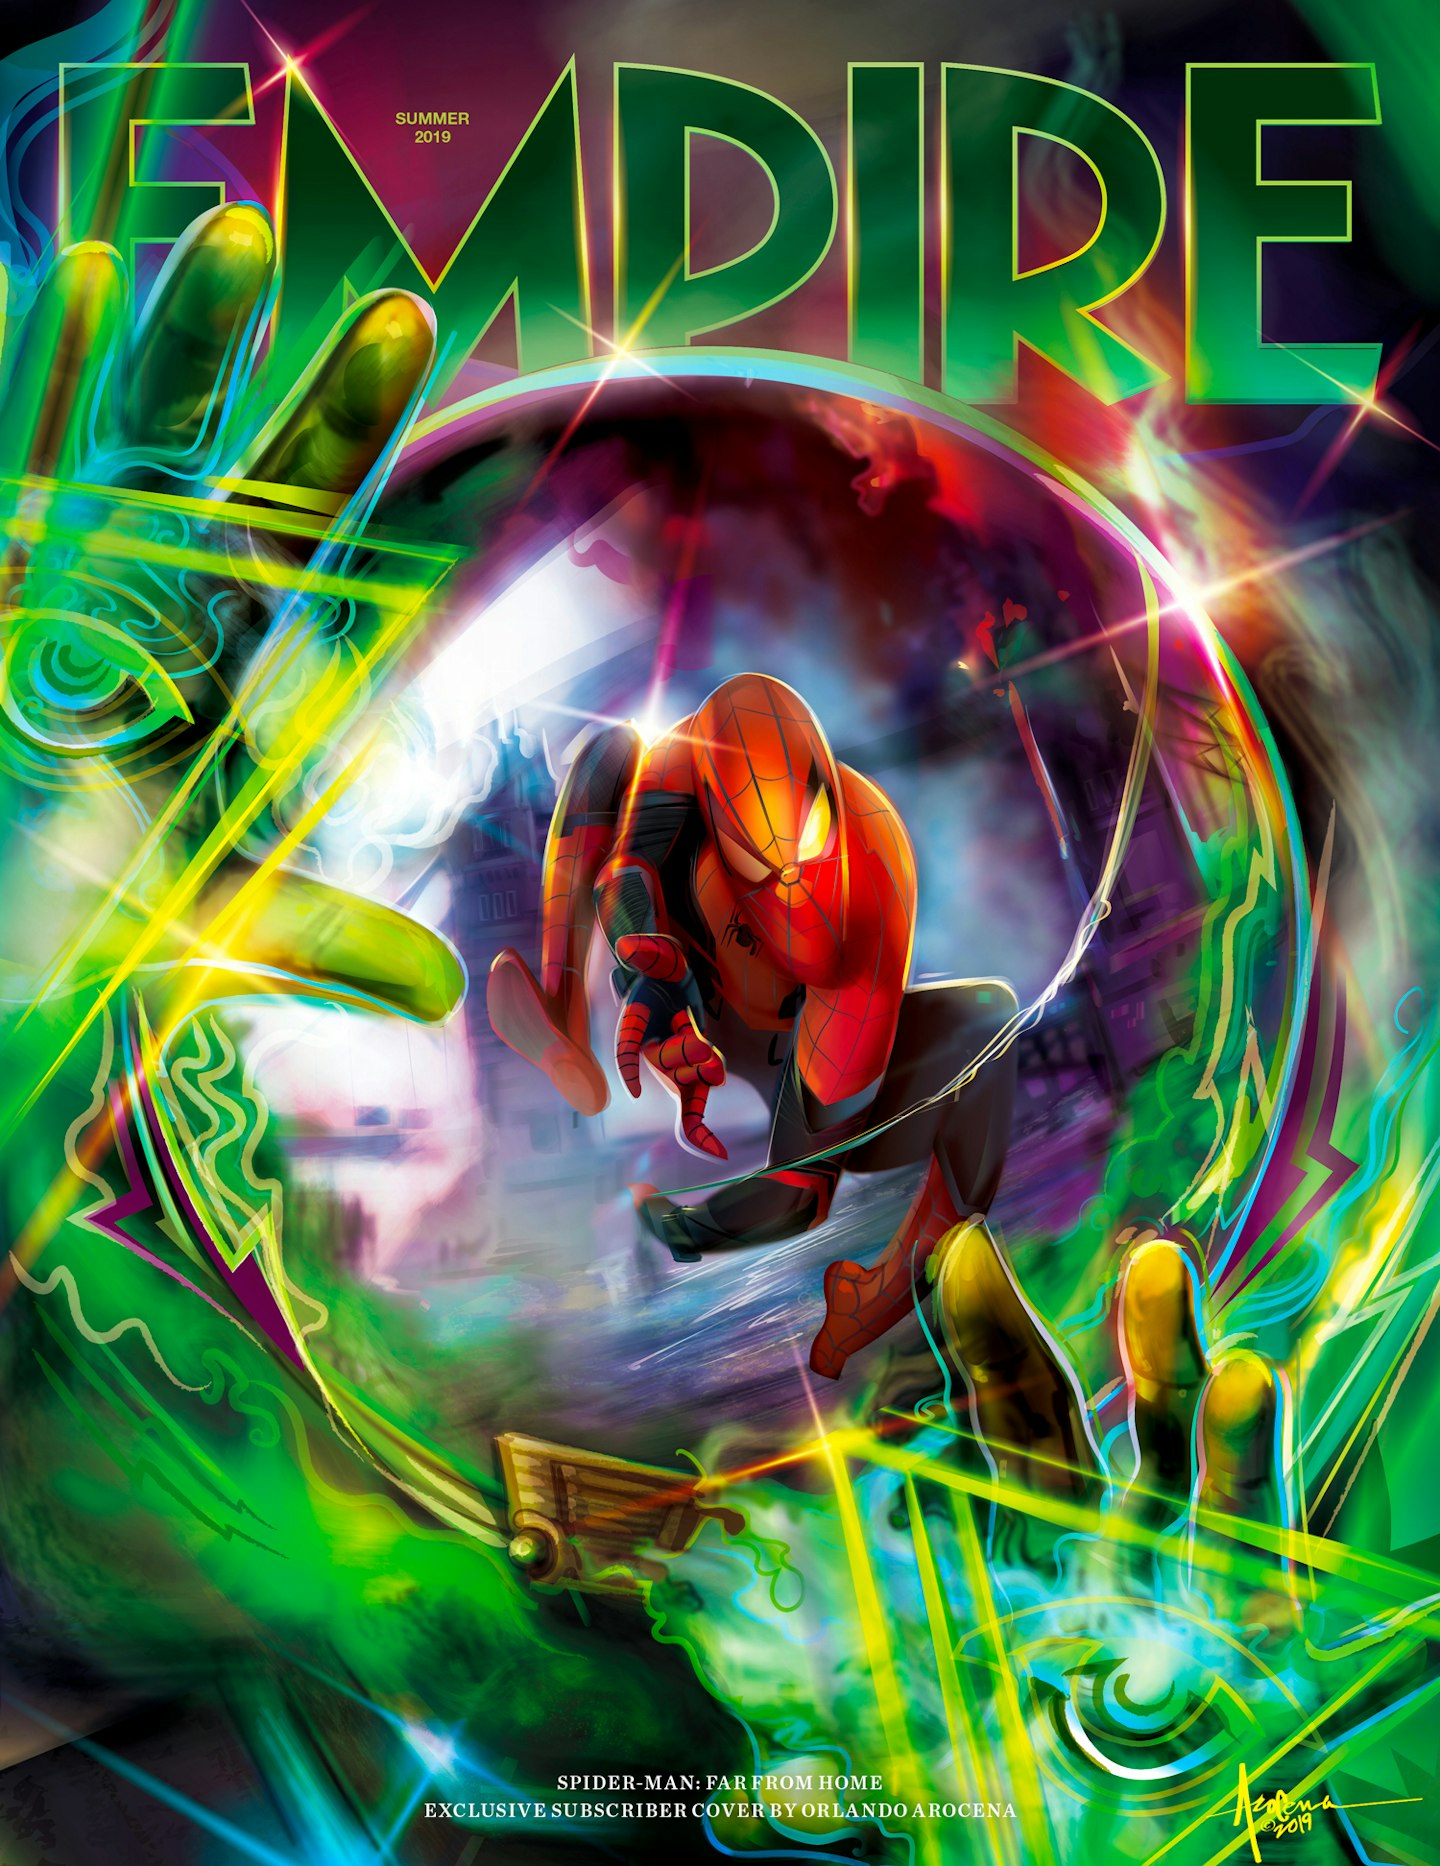 Empire - Summer 2019 - Spider-Man Far From Home subscriber cover